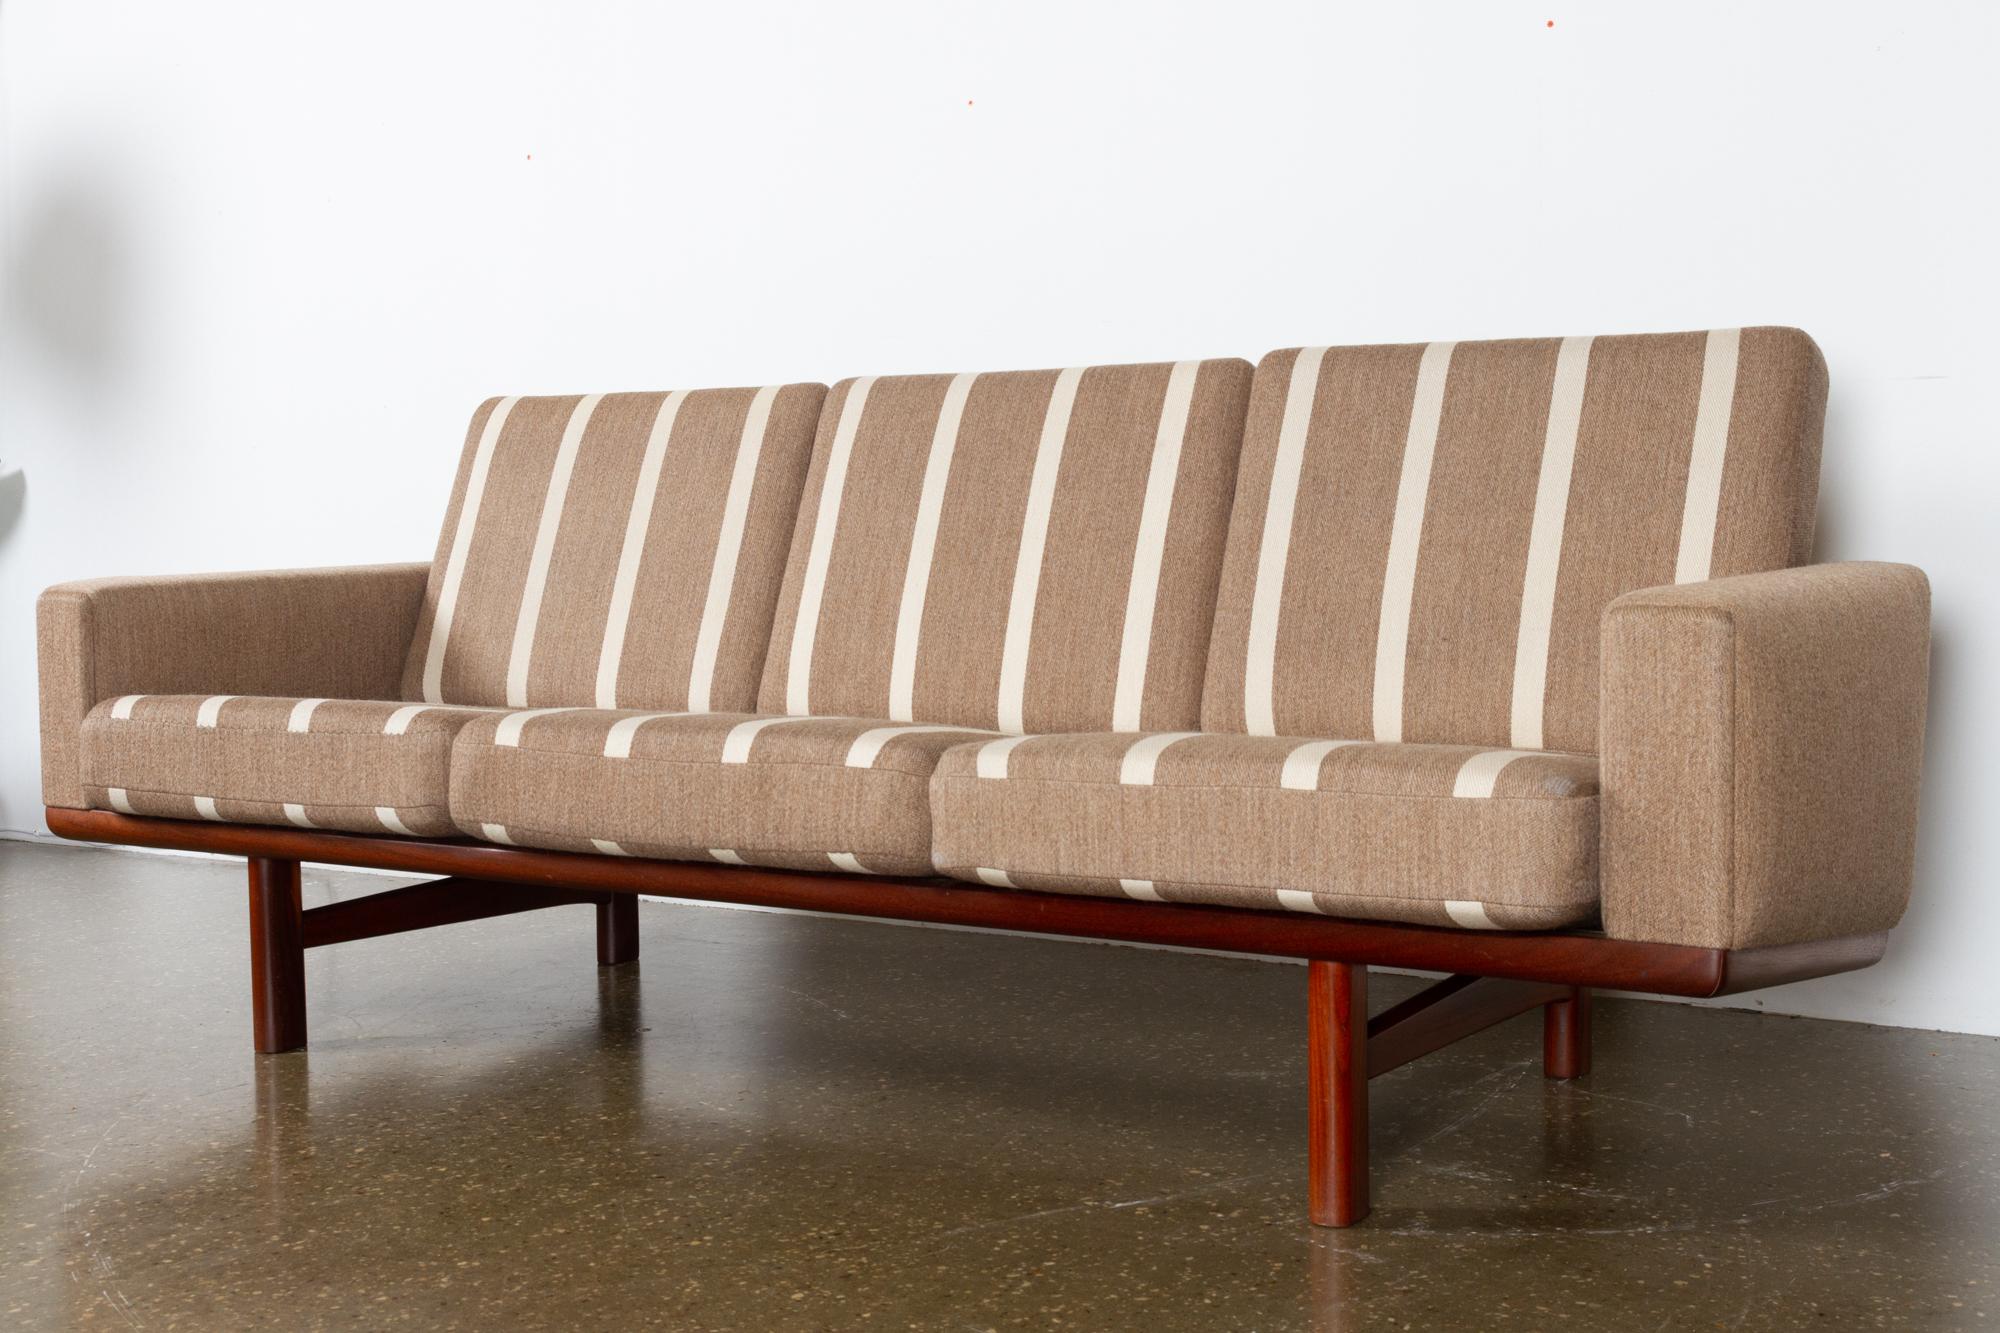 GE-236 three-seat sofa by Hans J. Wegner for GETAMA, 1960s
Danish Mid-Century Modern Minimalist sofa in teak. Model GE 236 was designed by Hans J. Wegner in 1955. Being a three-seater this sofa has the model number GE236/3. Excellent high quality